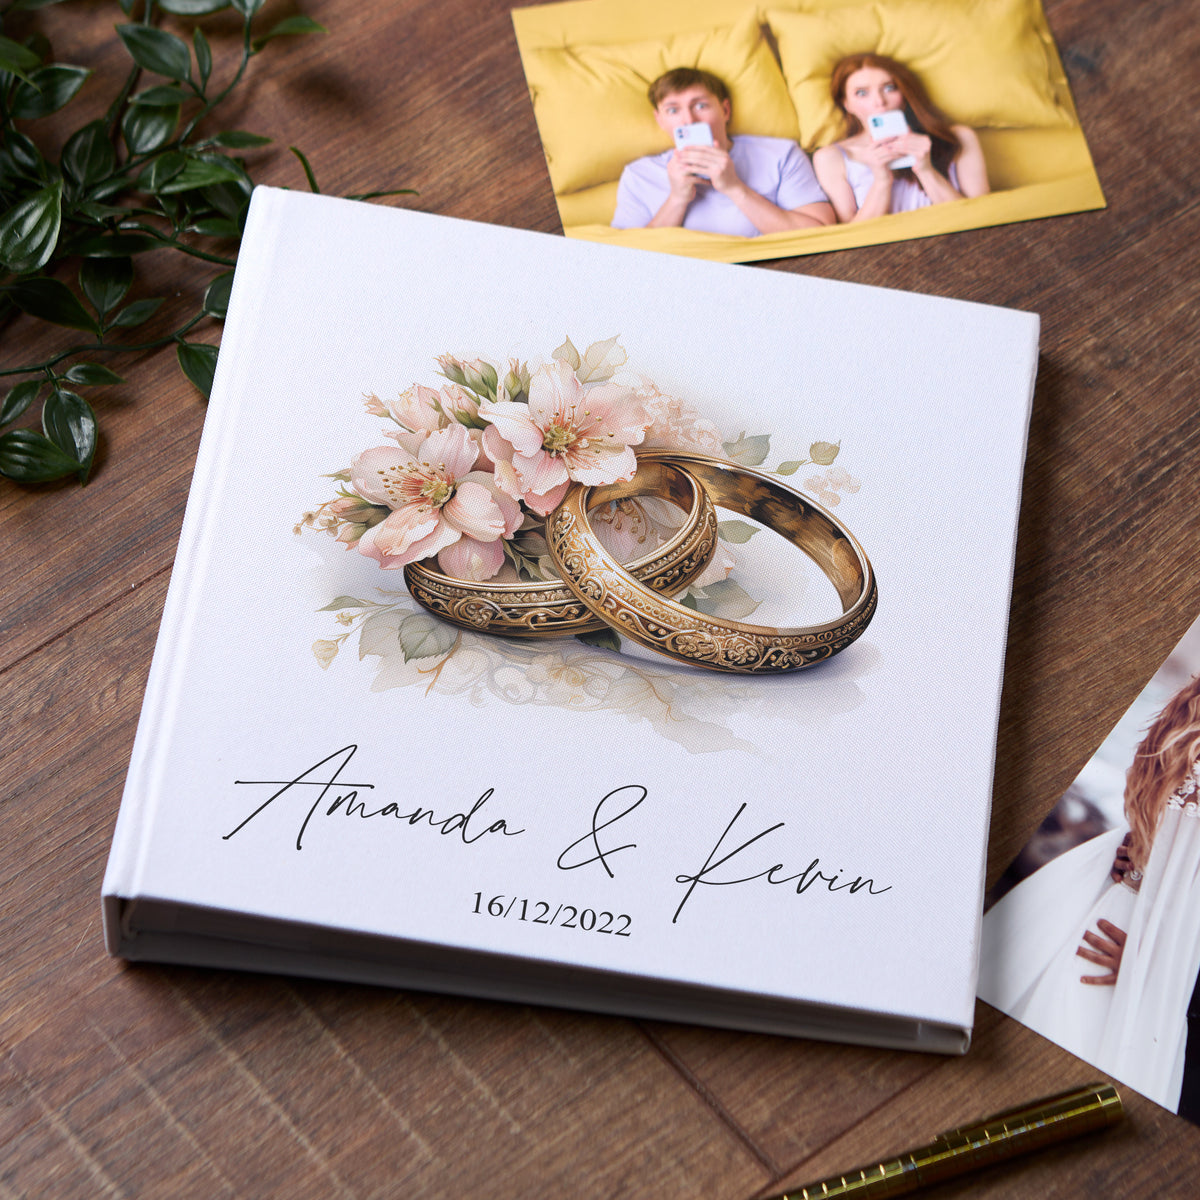 Large Book Bound Personalised Wedding Photo Album With Floral Rings